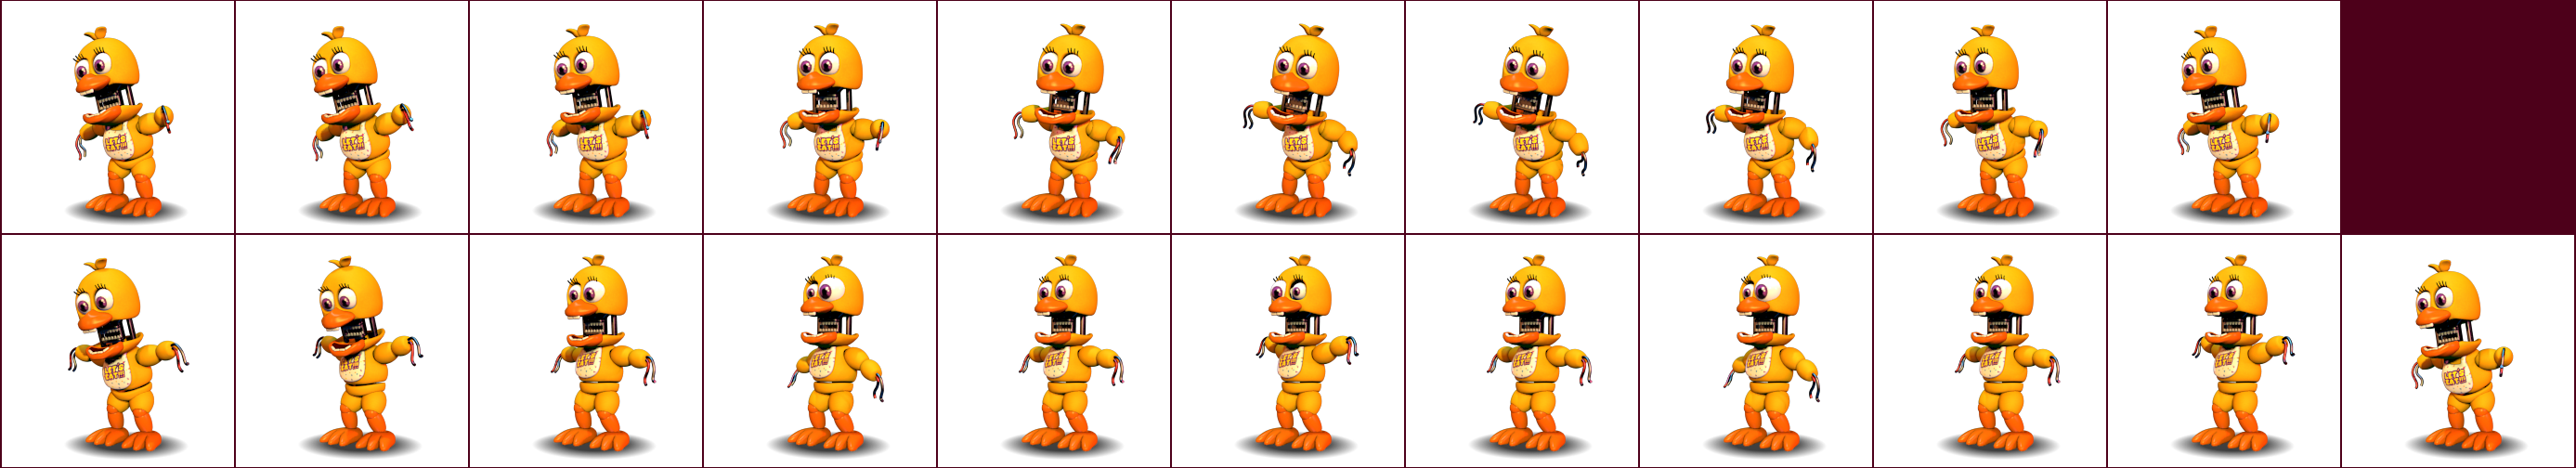 Pc Computer Fnaf World Withered Chica The Spriters Resource